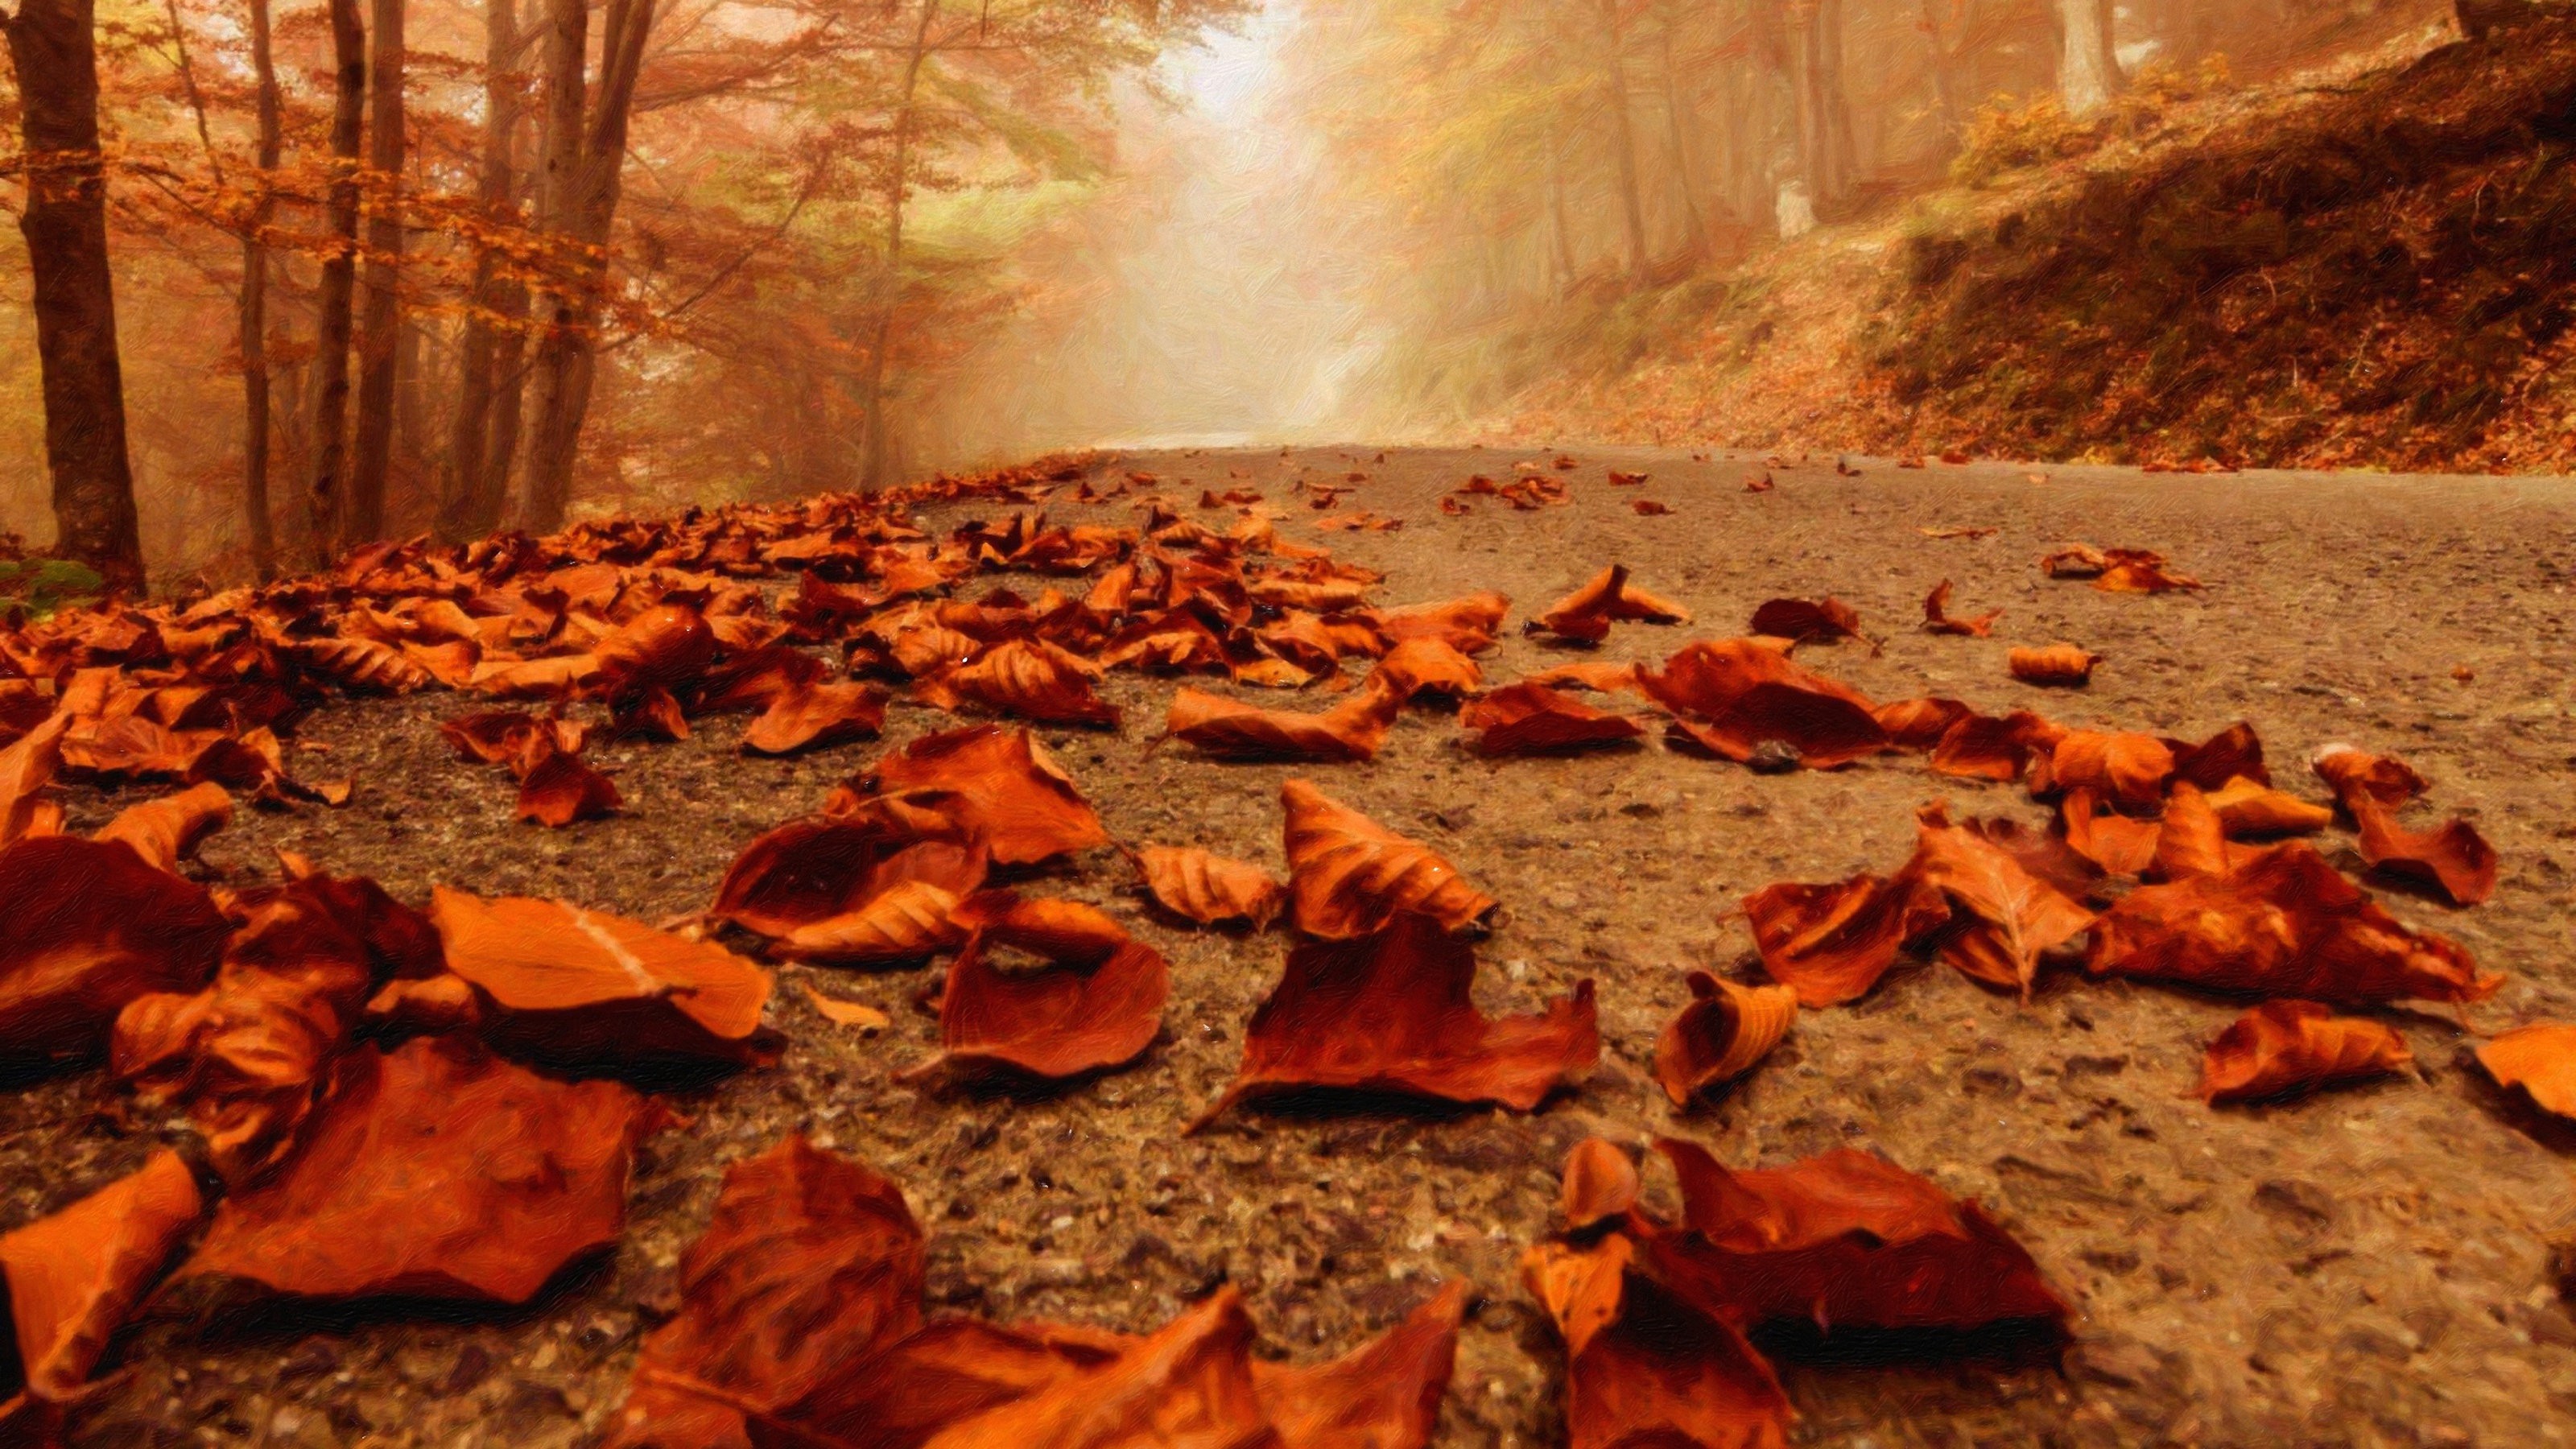 General 3200x1800 fall leaves path forest fallen leaves outdoors trees